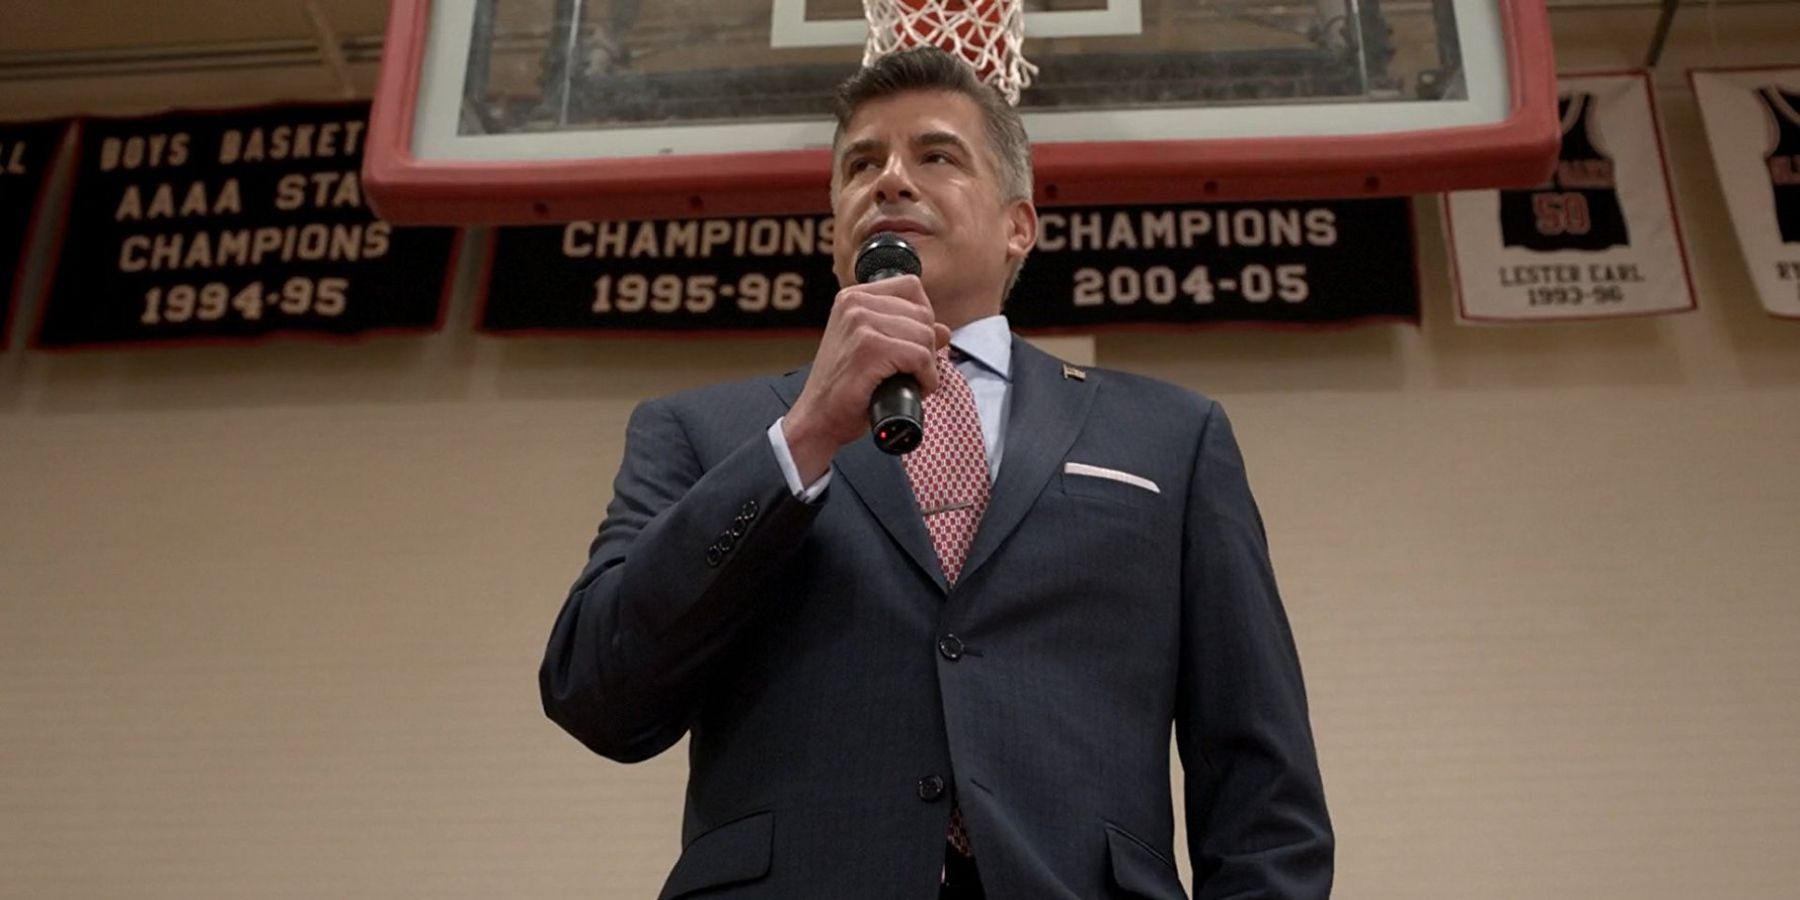 Mayor Maddox speaks into a microphone in a gym in the TV show Scream.